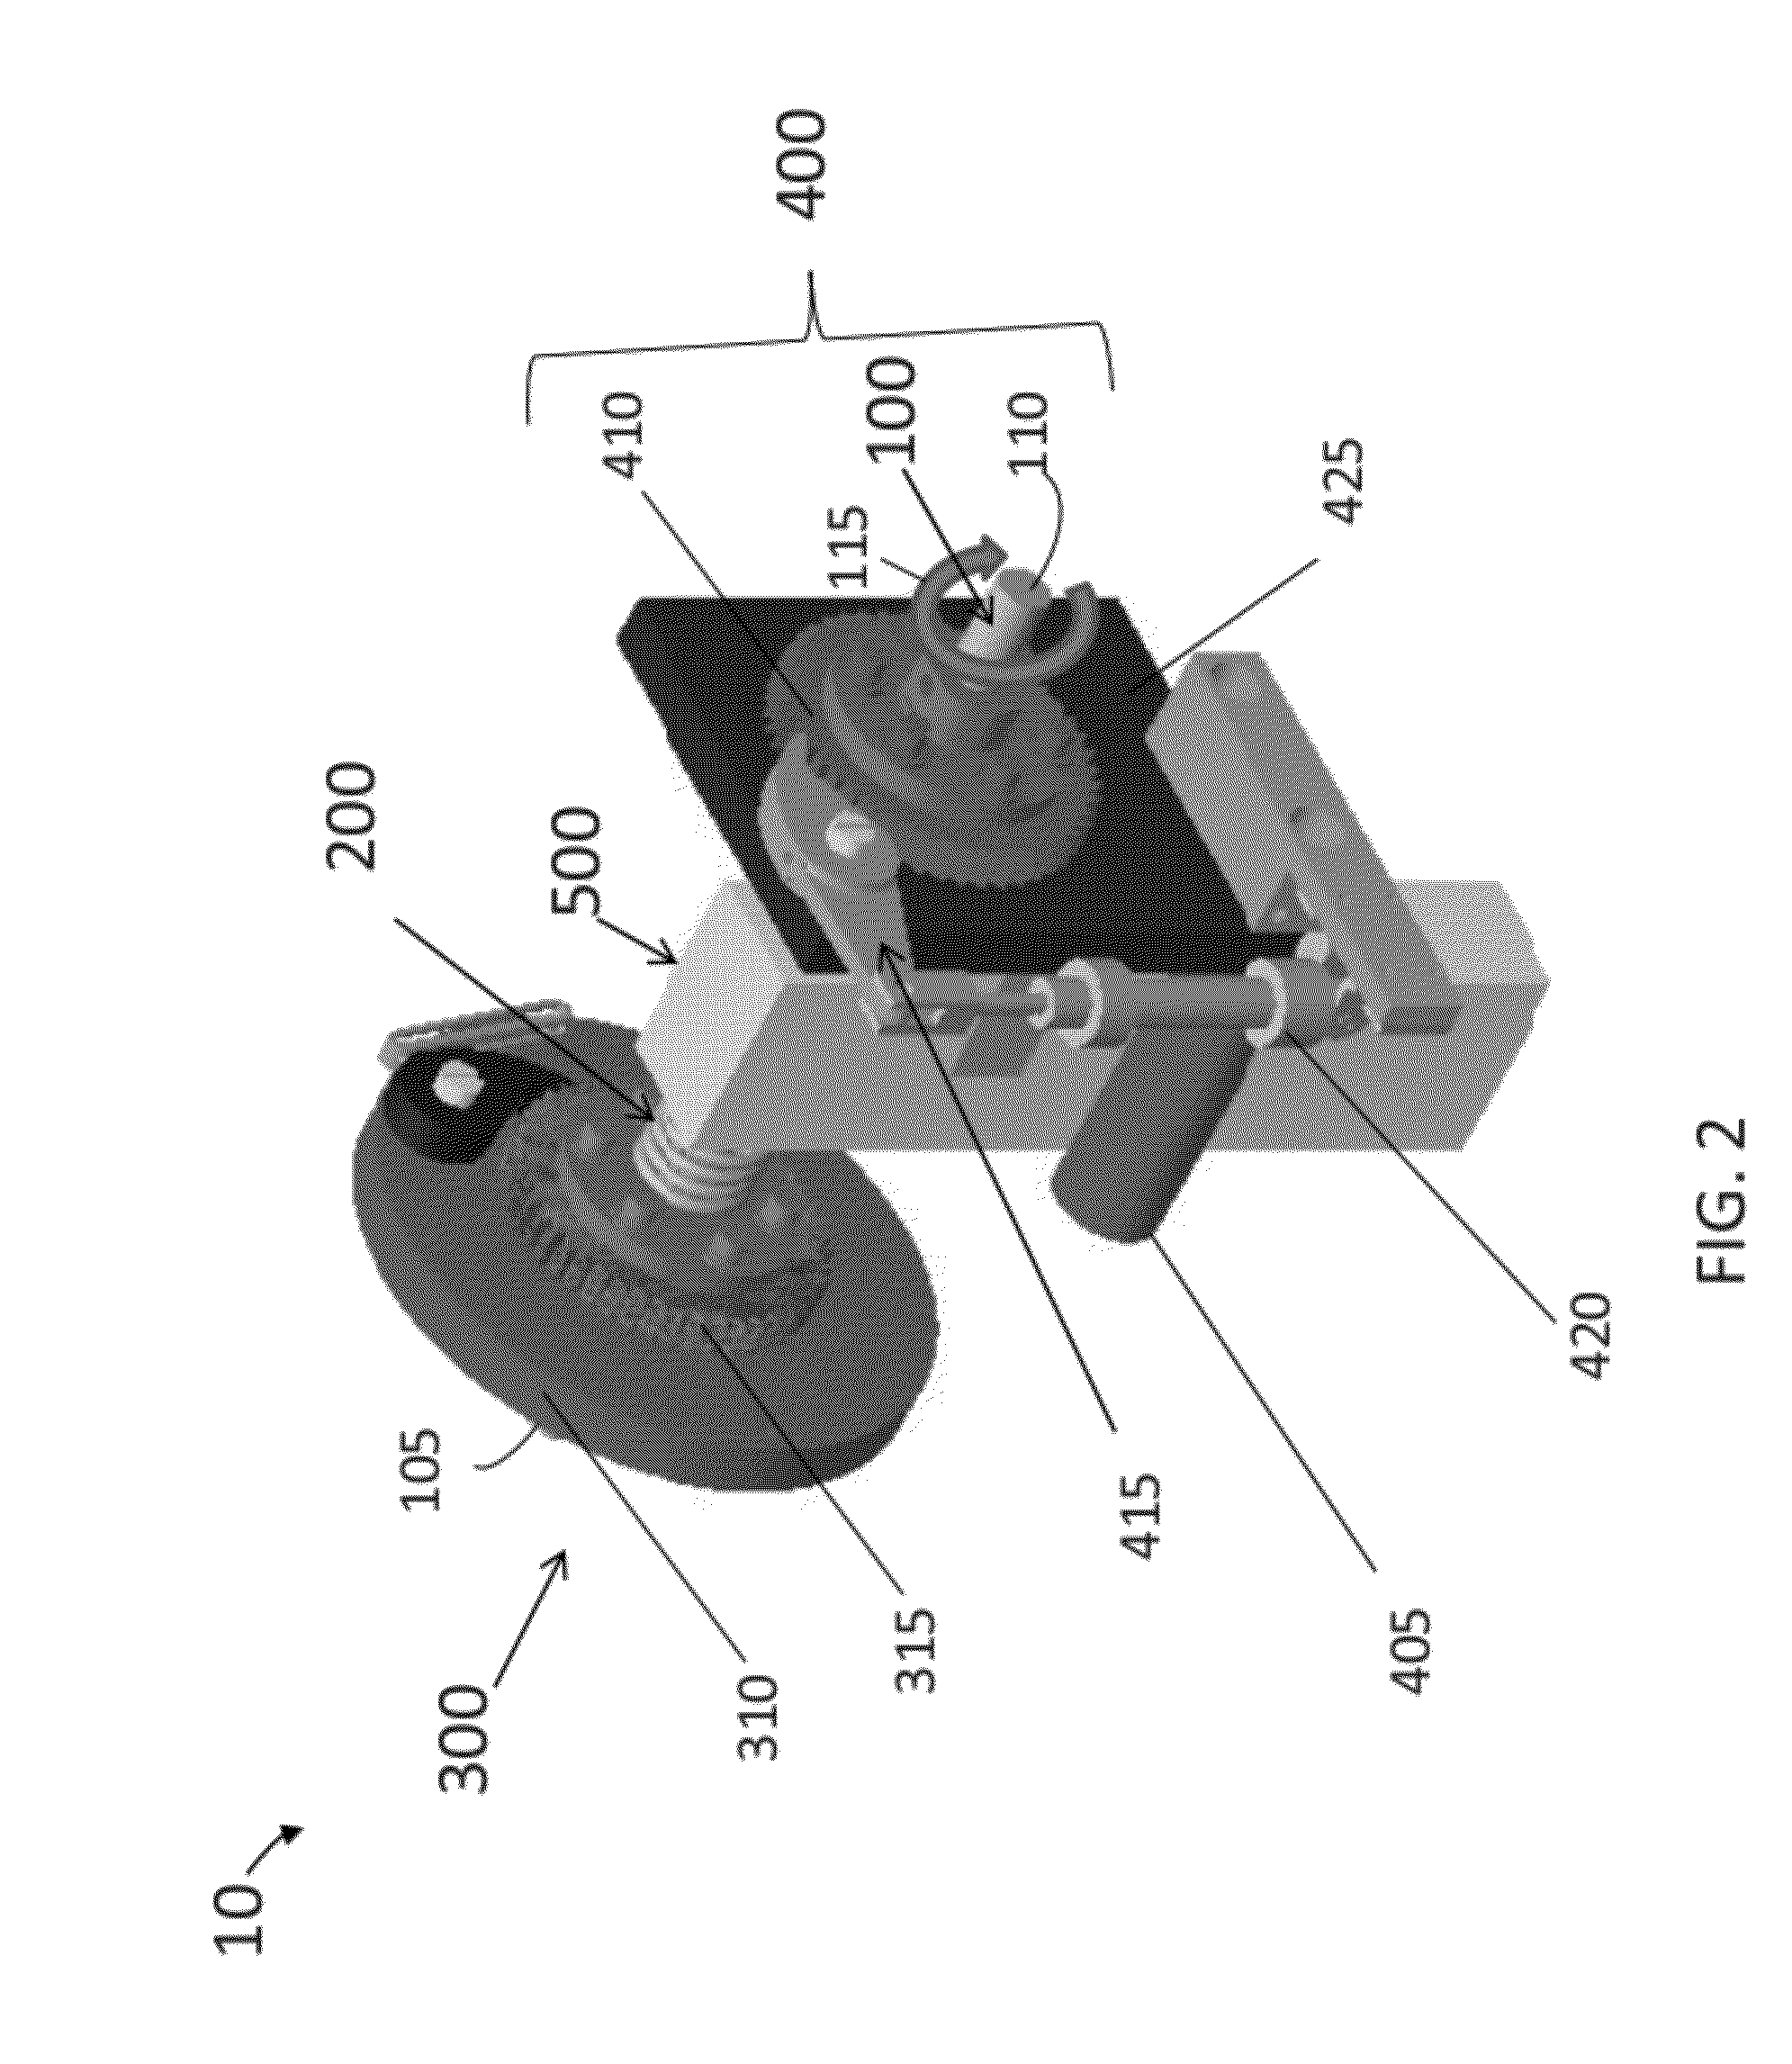 Energy storage and release system